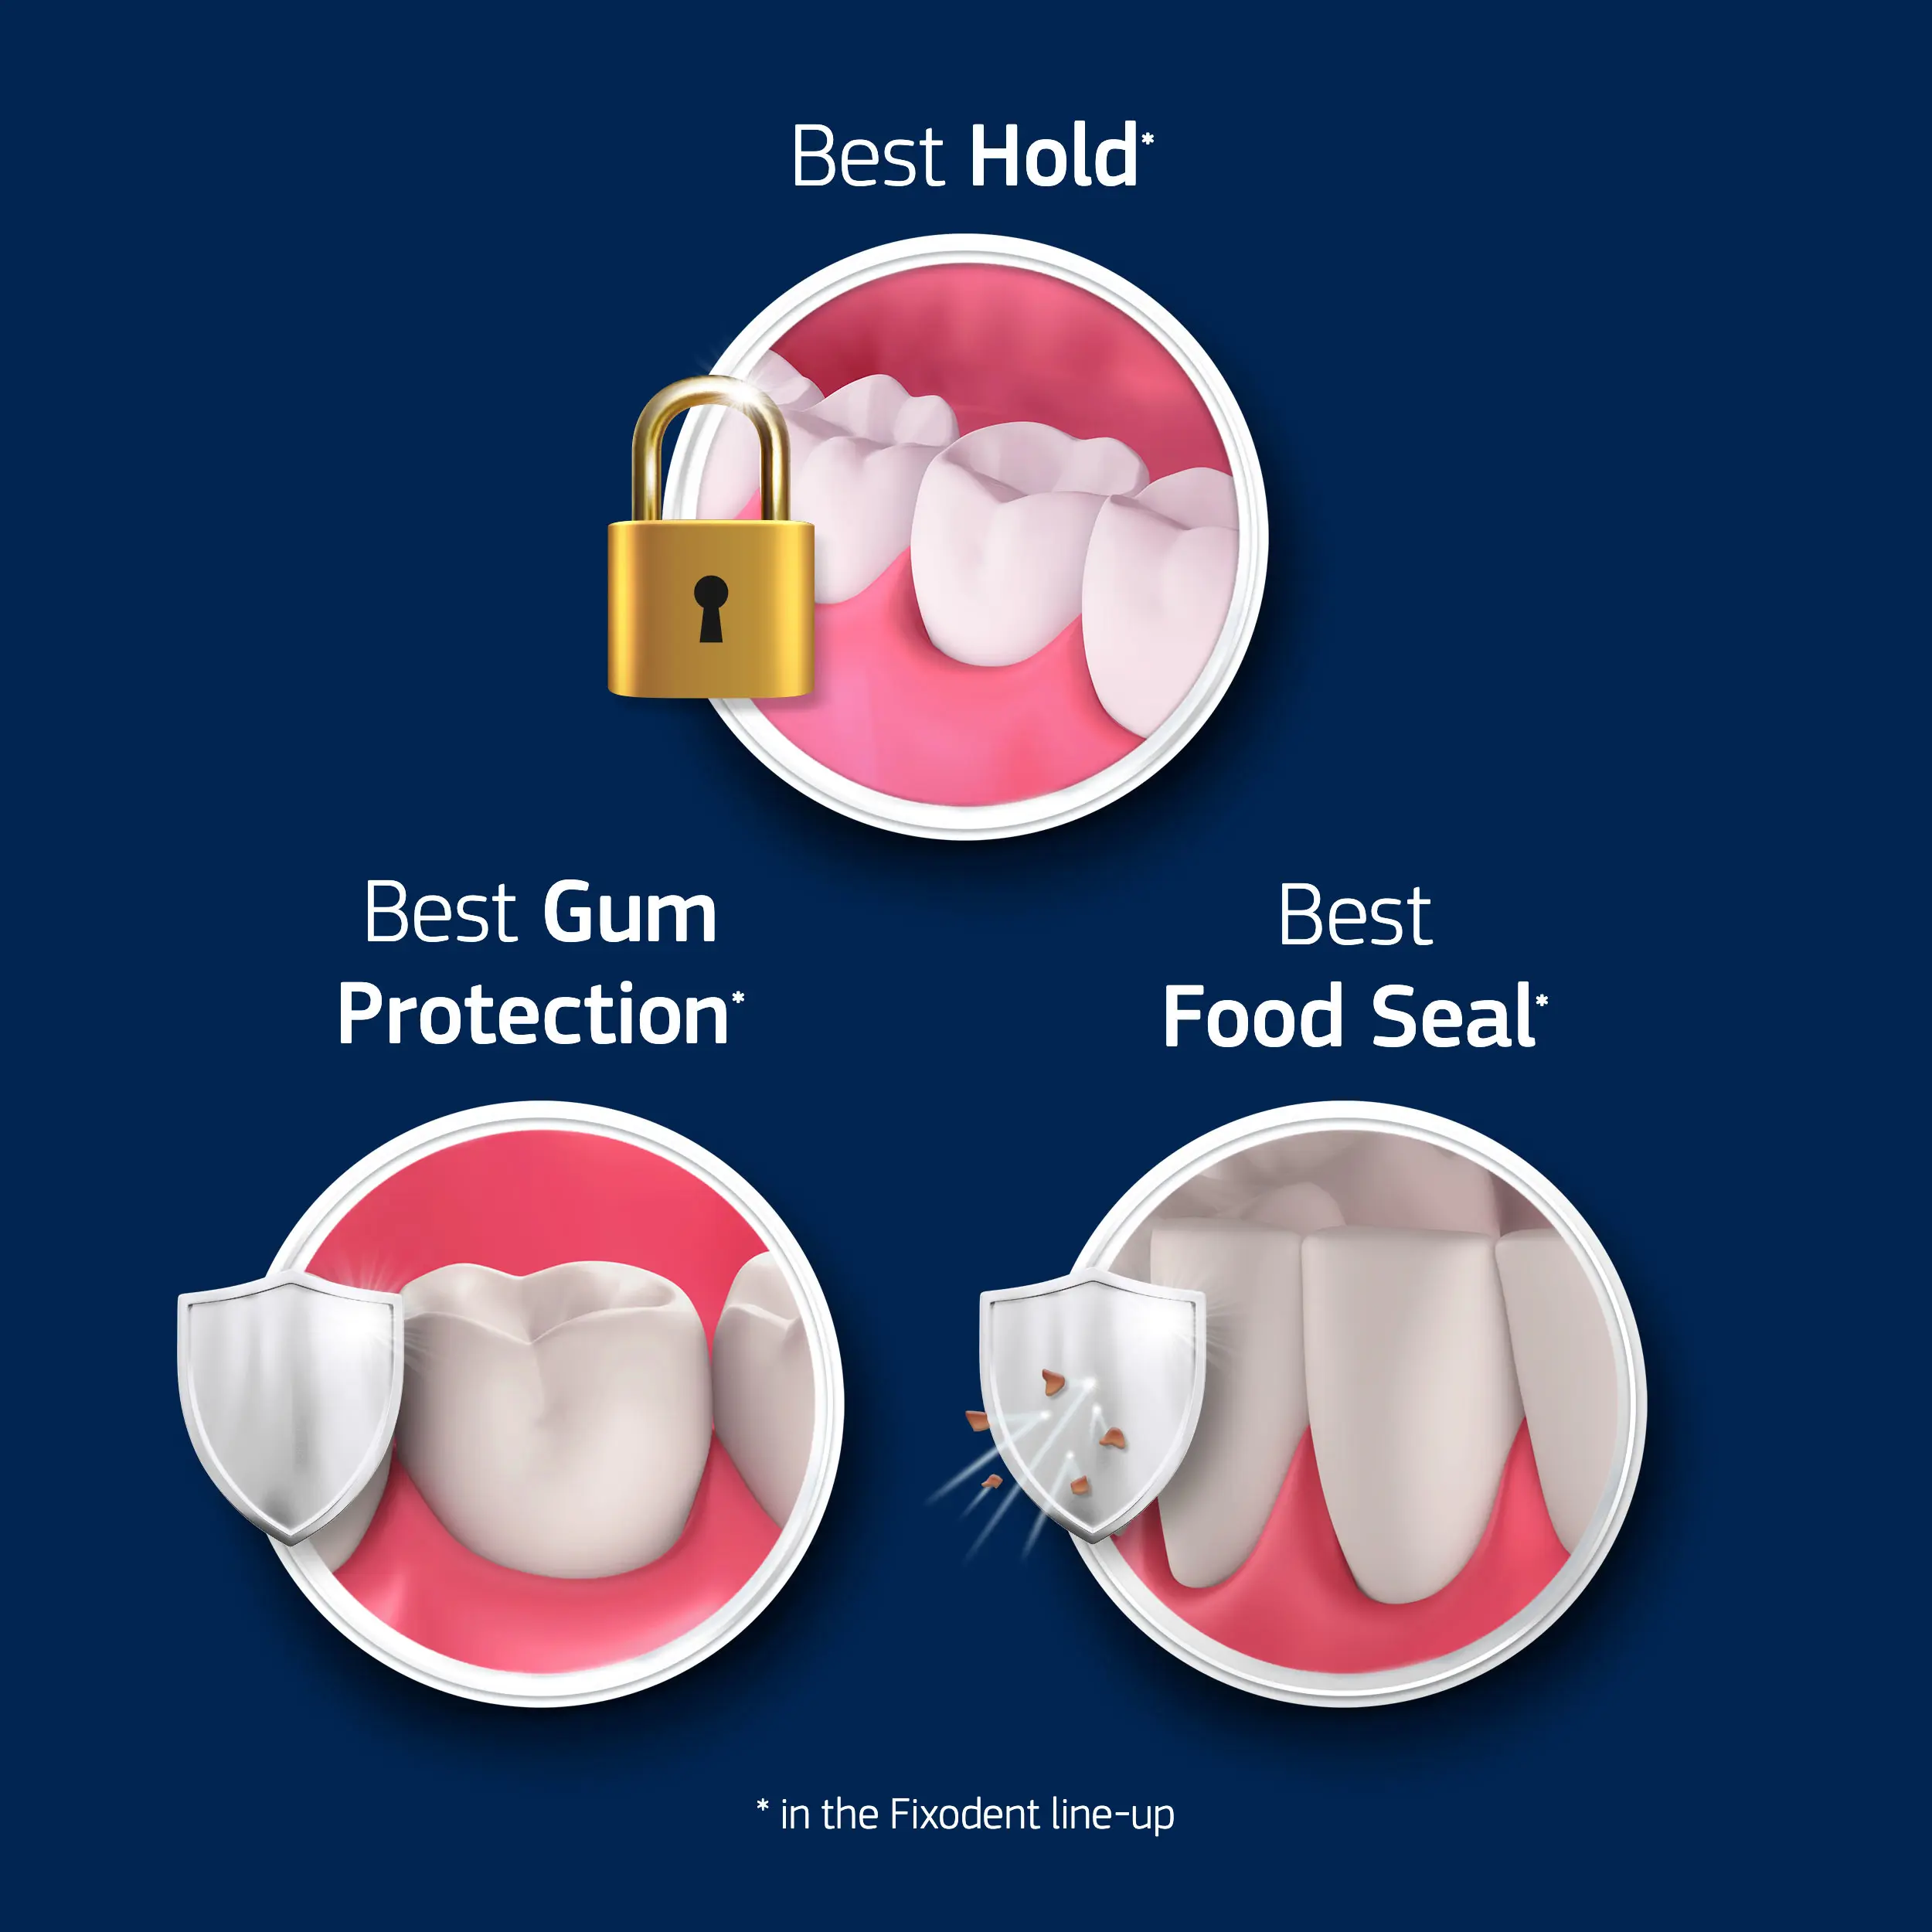 Fixodent Professional - Best hold, best gum protection and best food seal